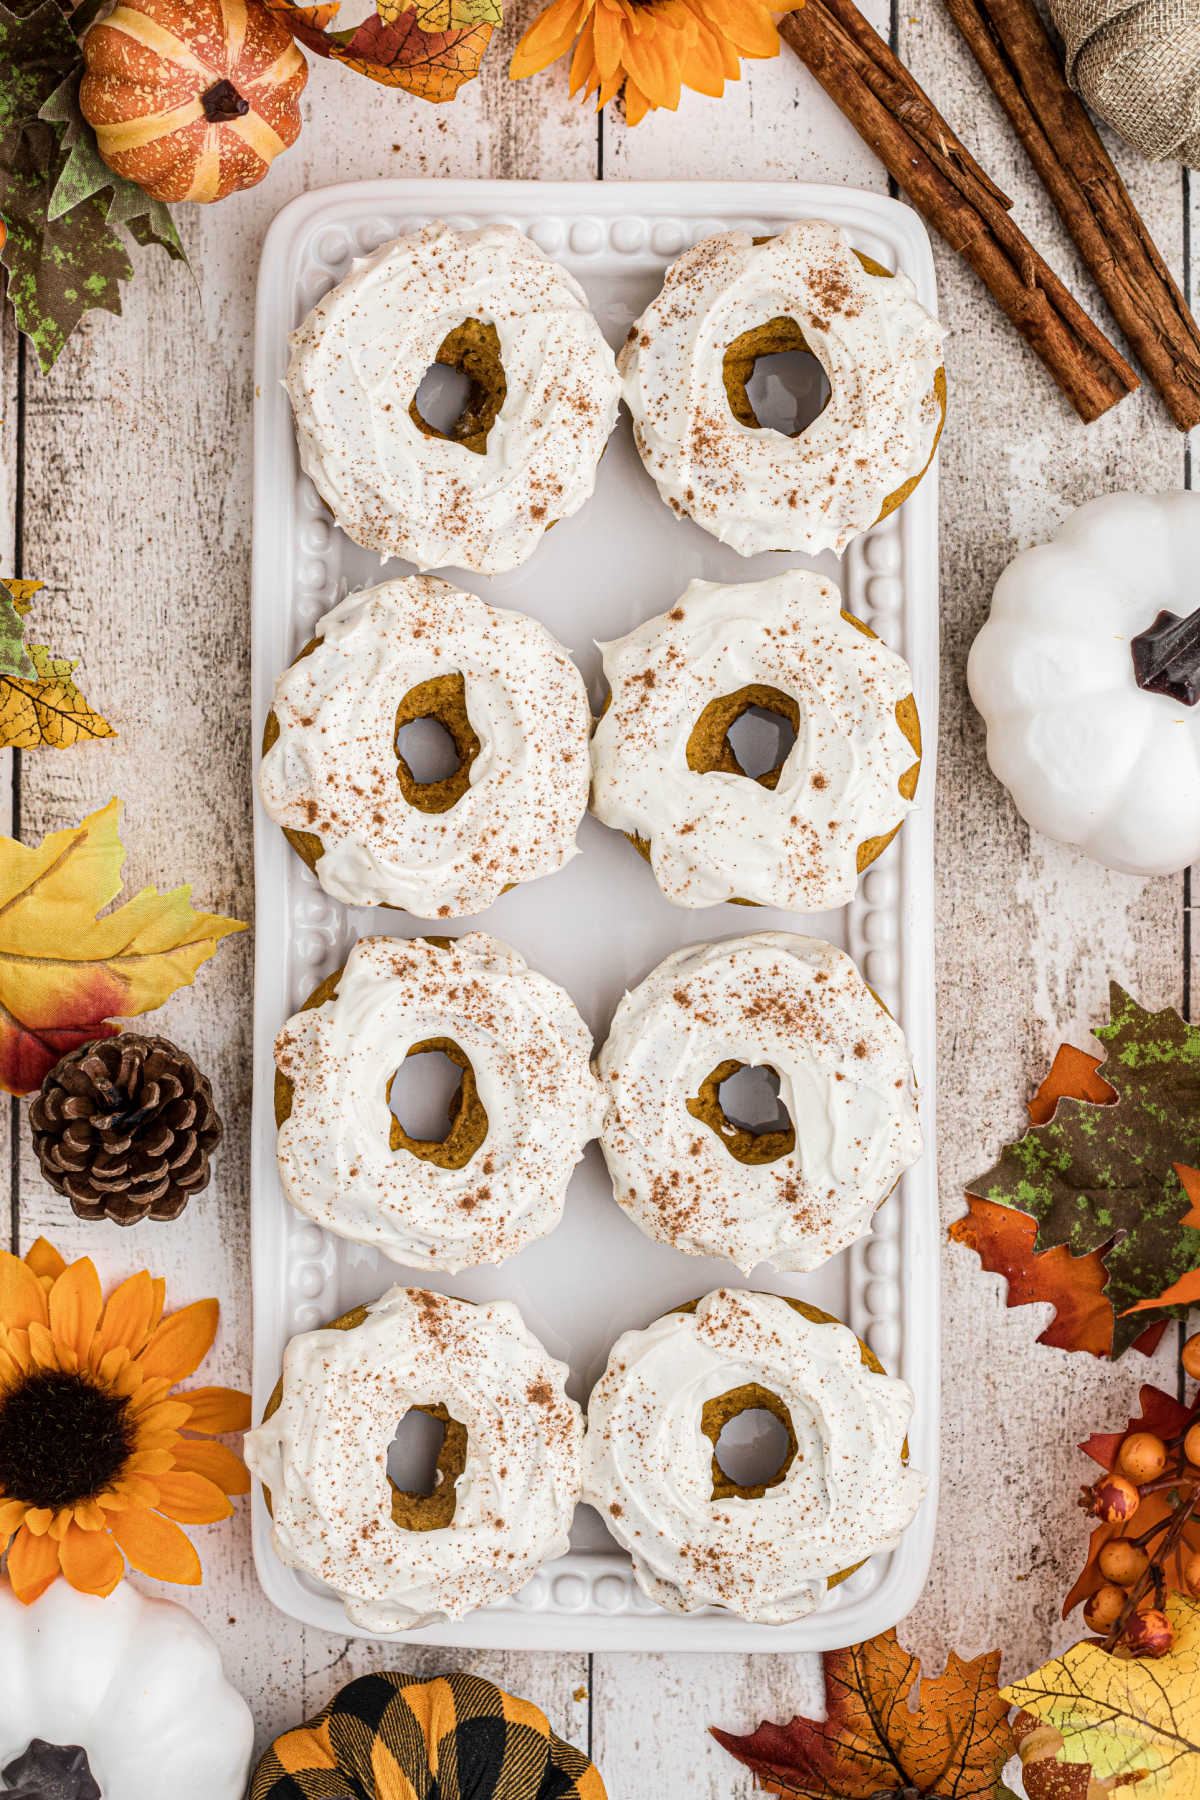 Overhead shot of a plate full of pumpkin spice donuts.